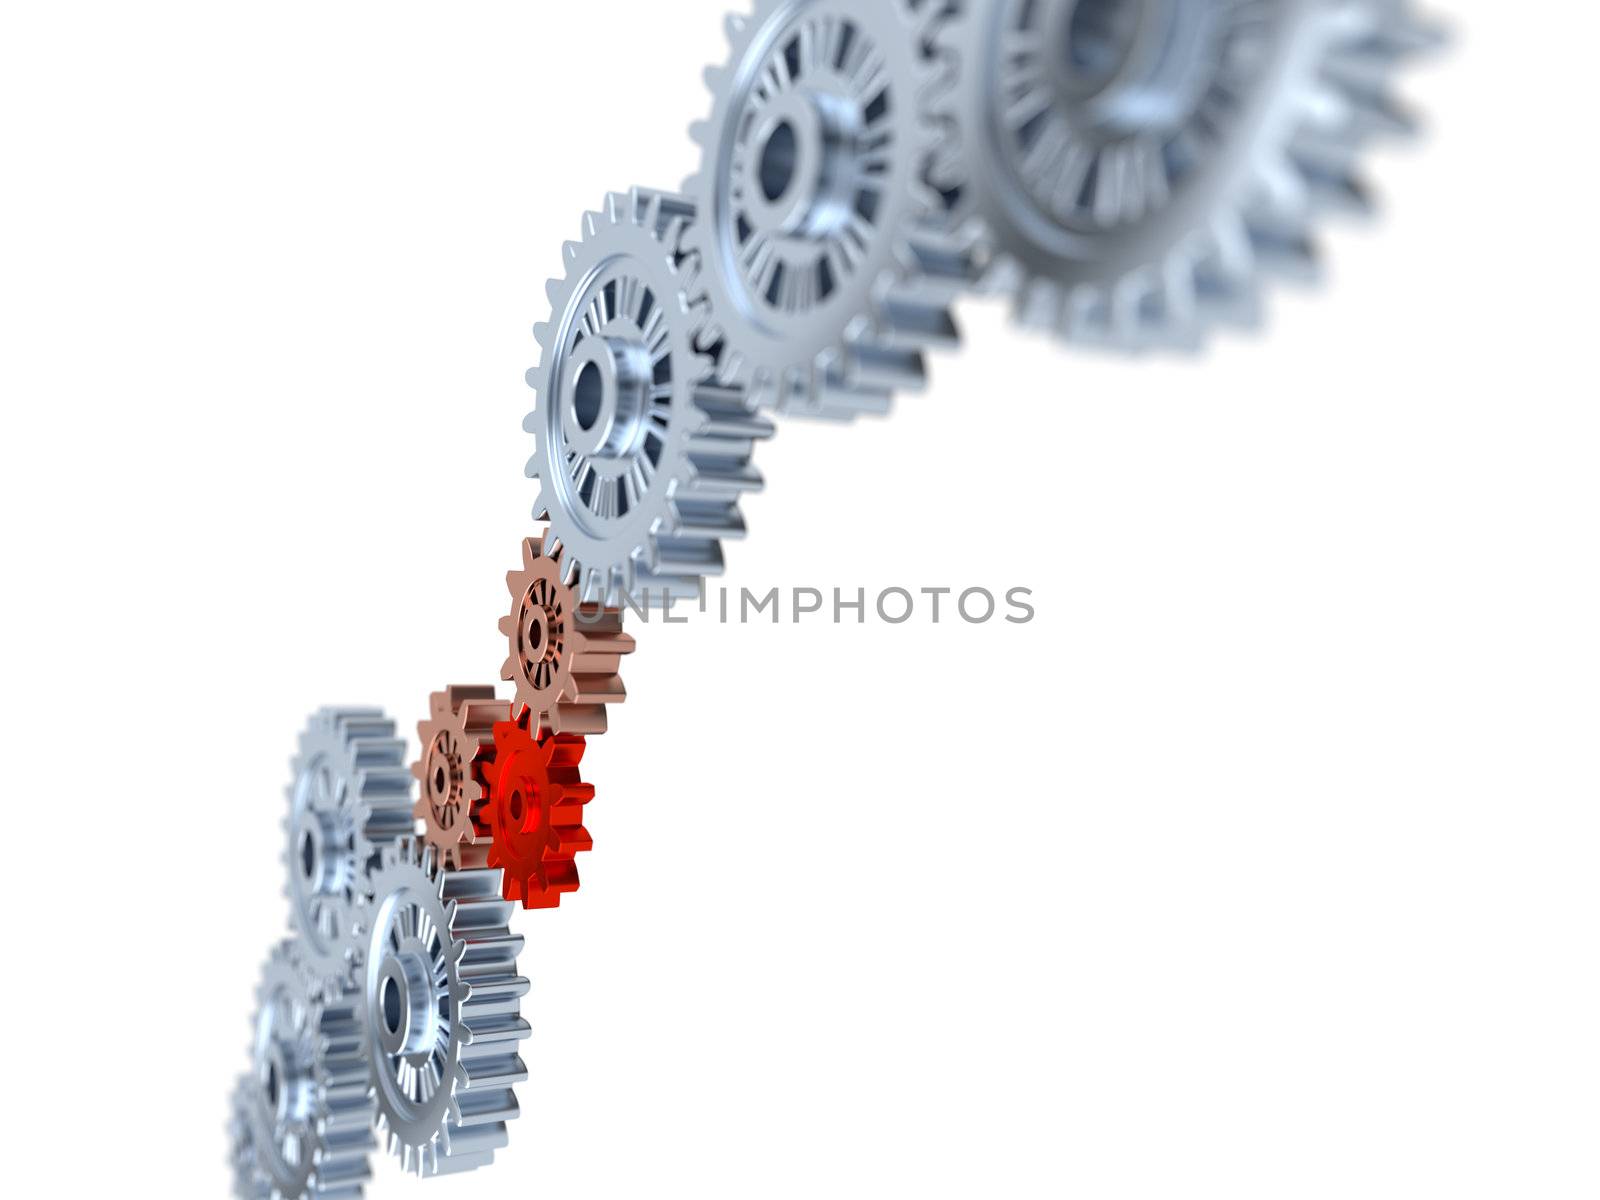 Some Silver Gears blurred with one Red by shkyo30